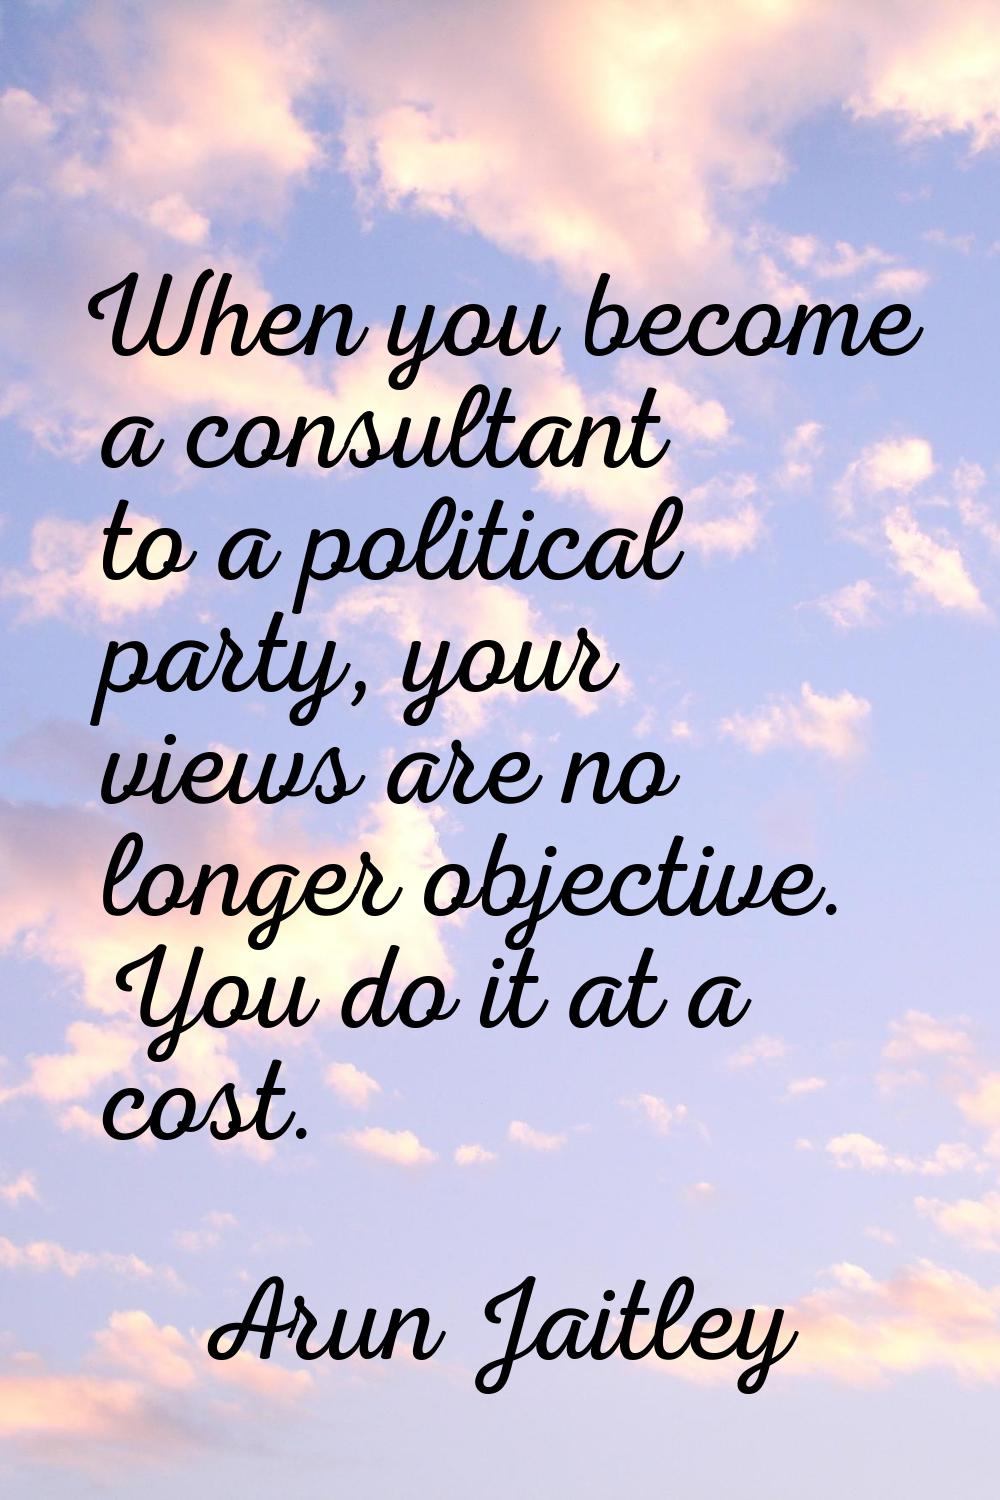 When you become a consultant to a political party, your views are no longer objective. You do it at